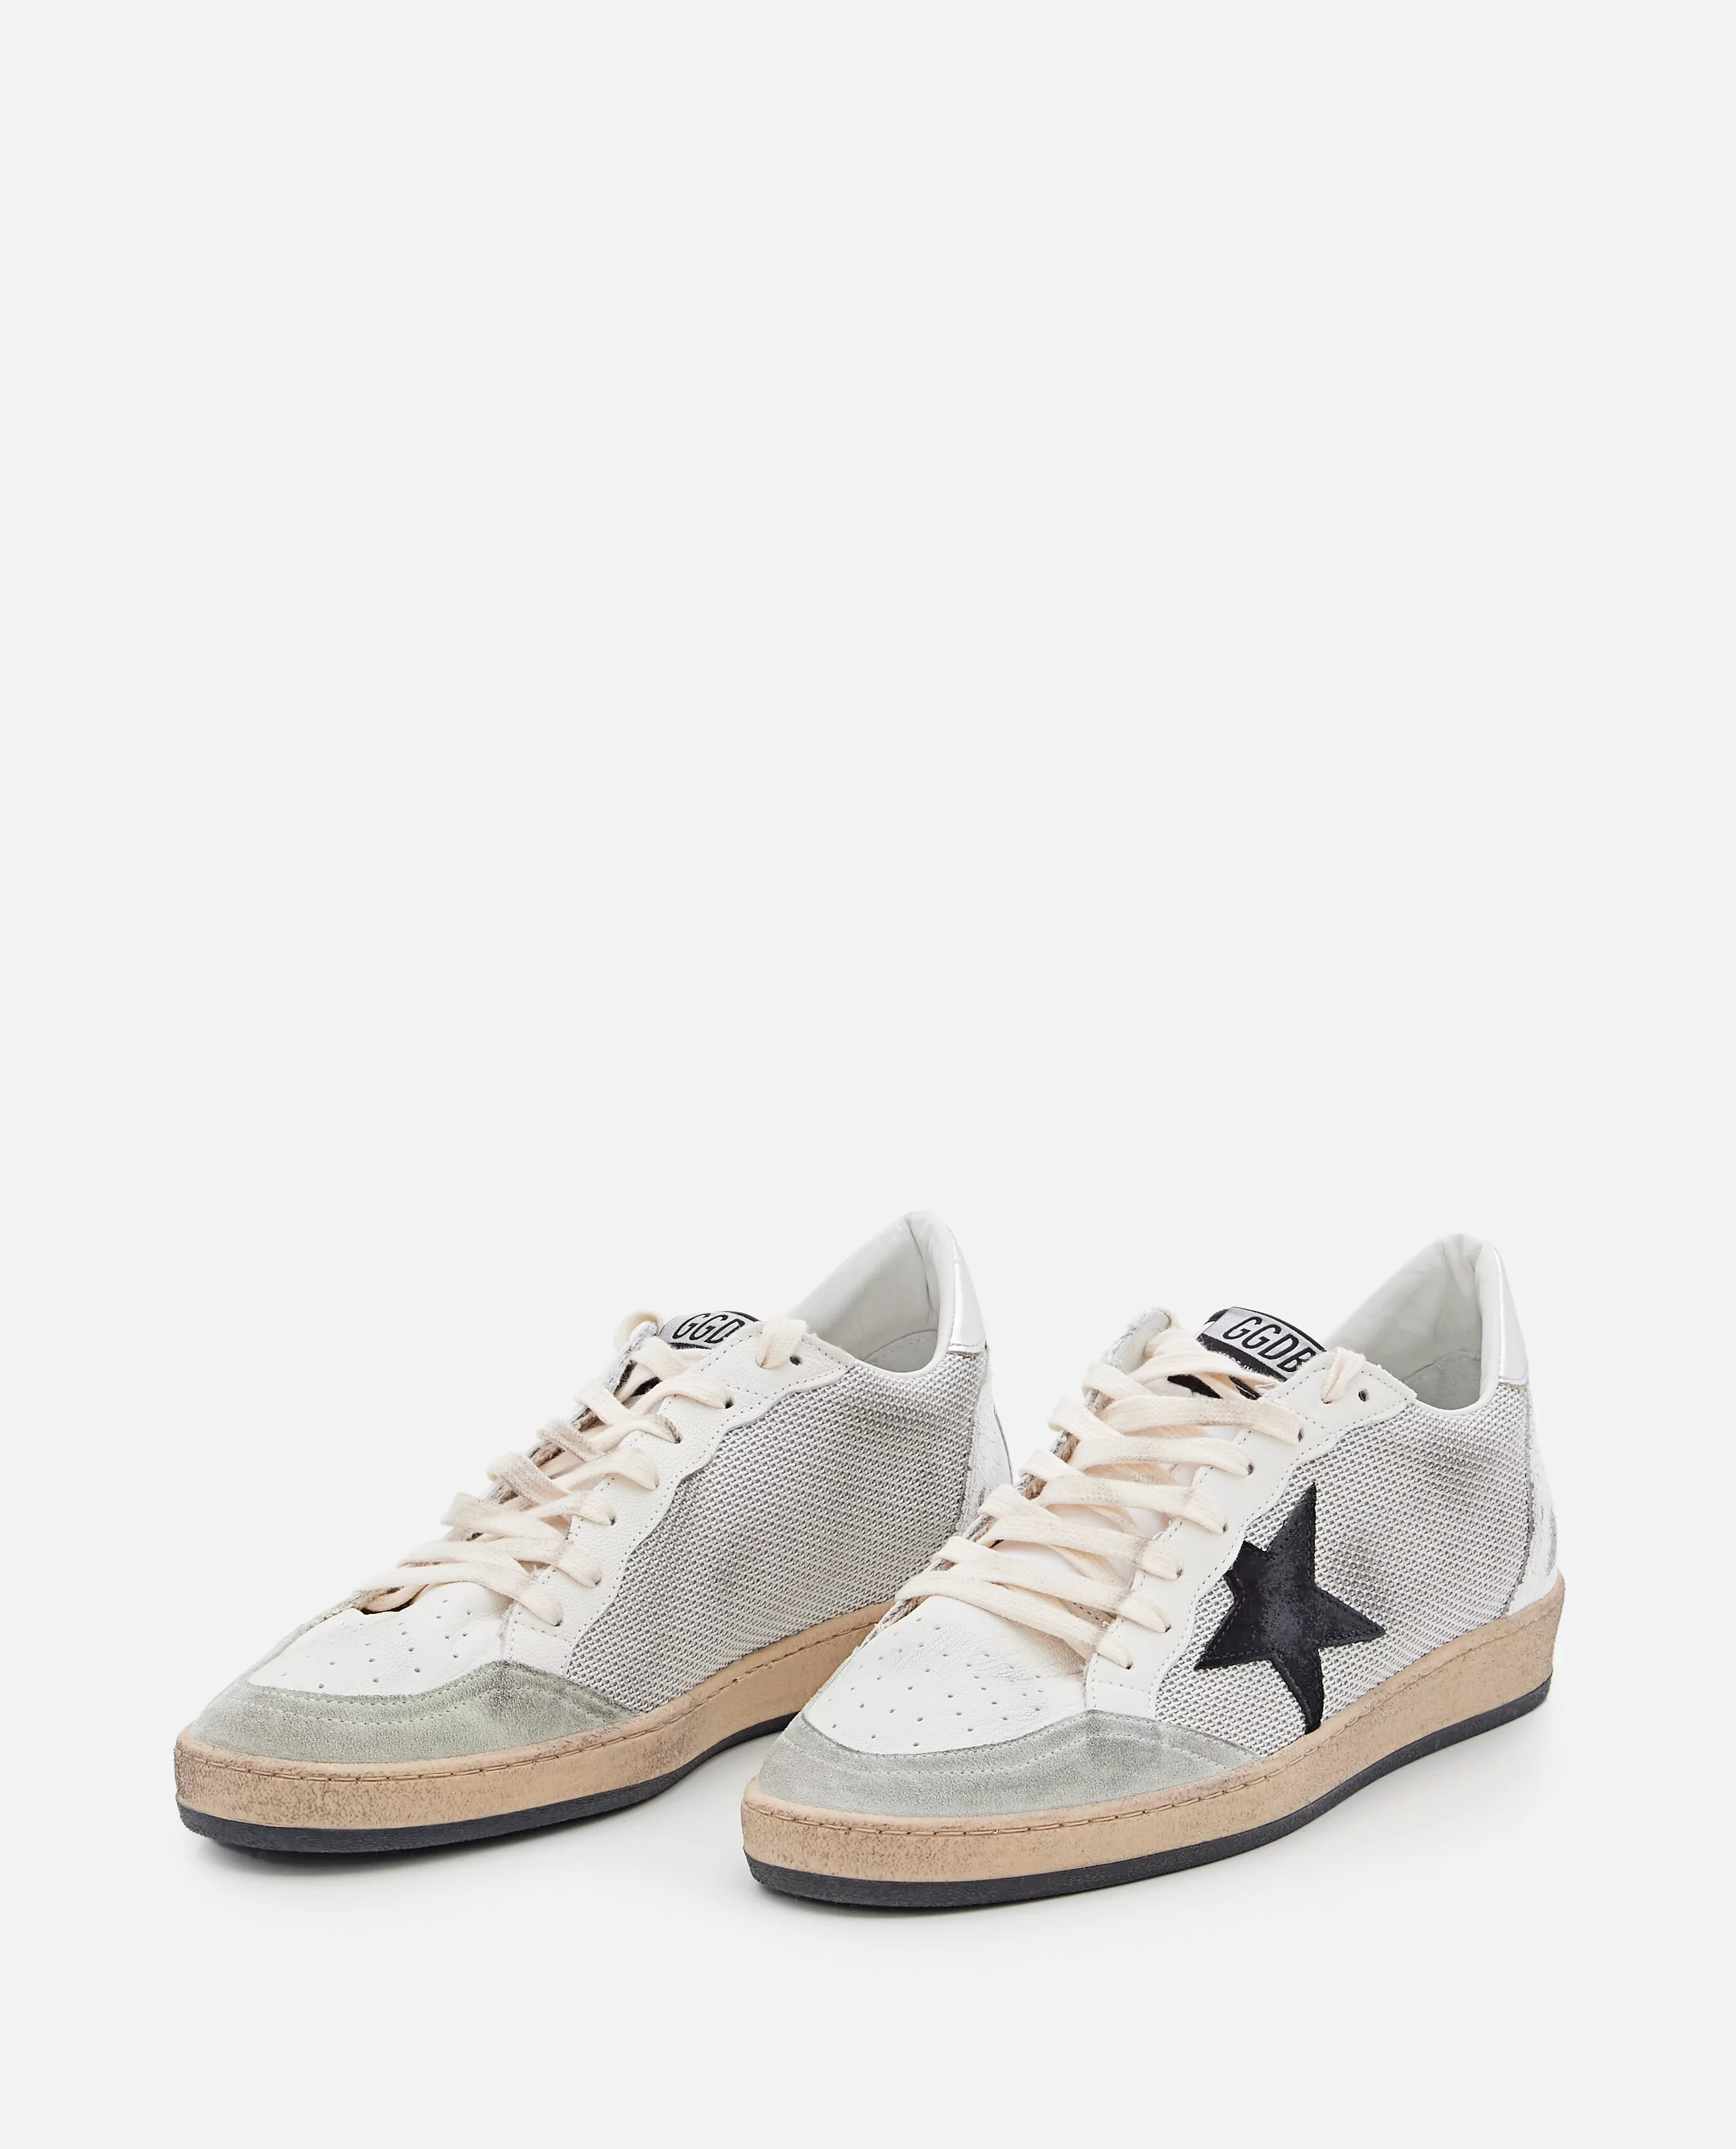 LOW-TOP 'BALL STAR' LEATHER AND SYNTHETIC SNEAKERS günstig online kaufen